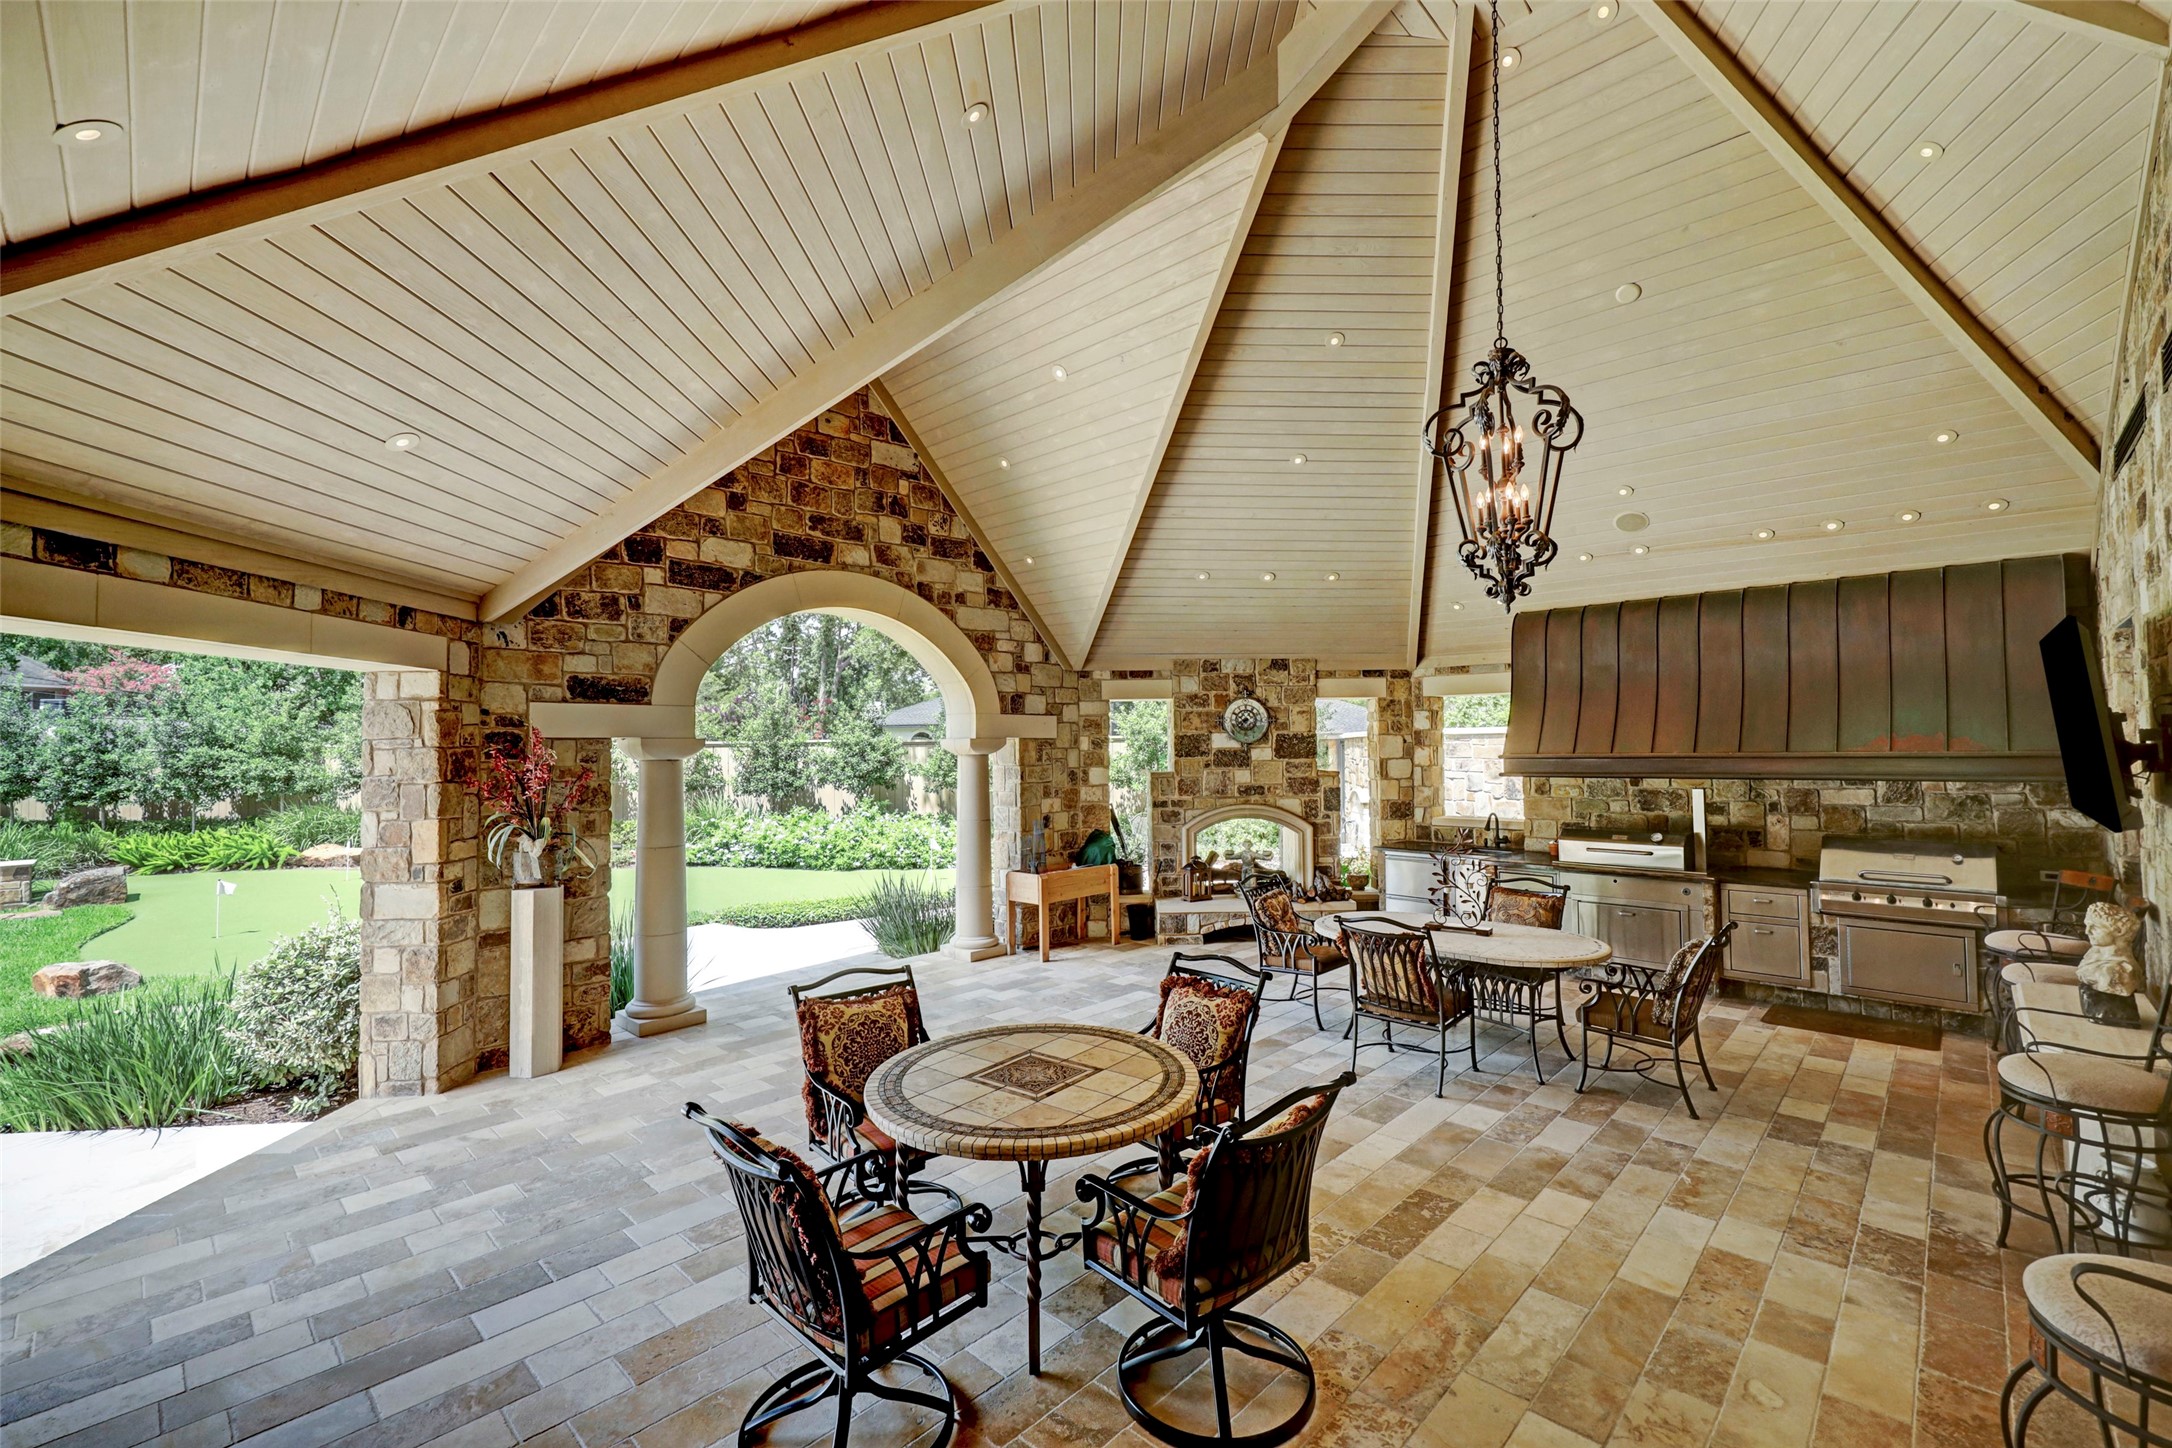 Spectacular air-conditioned pavilion with fireplace, smoker and grill with copper hood!